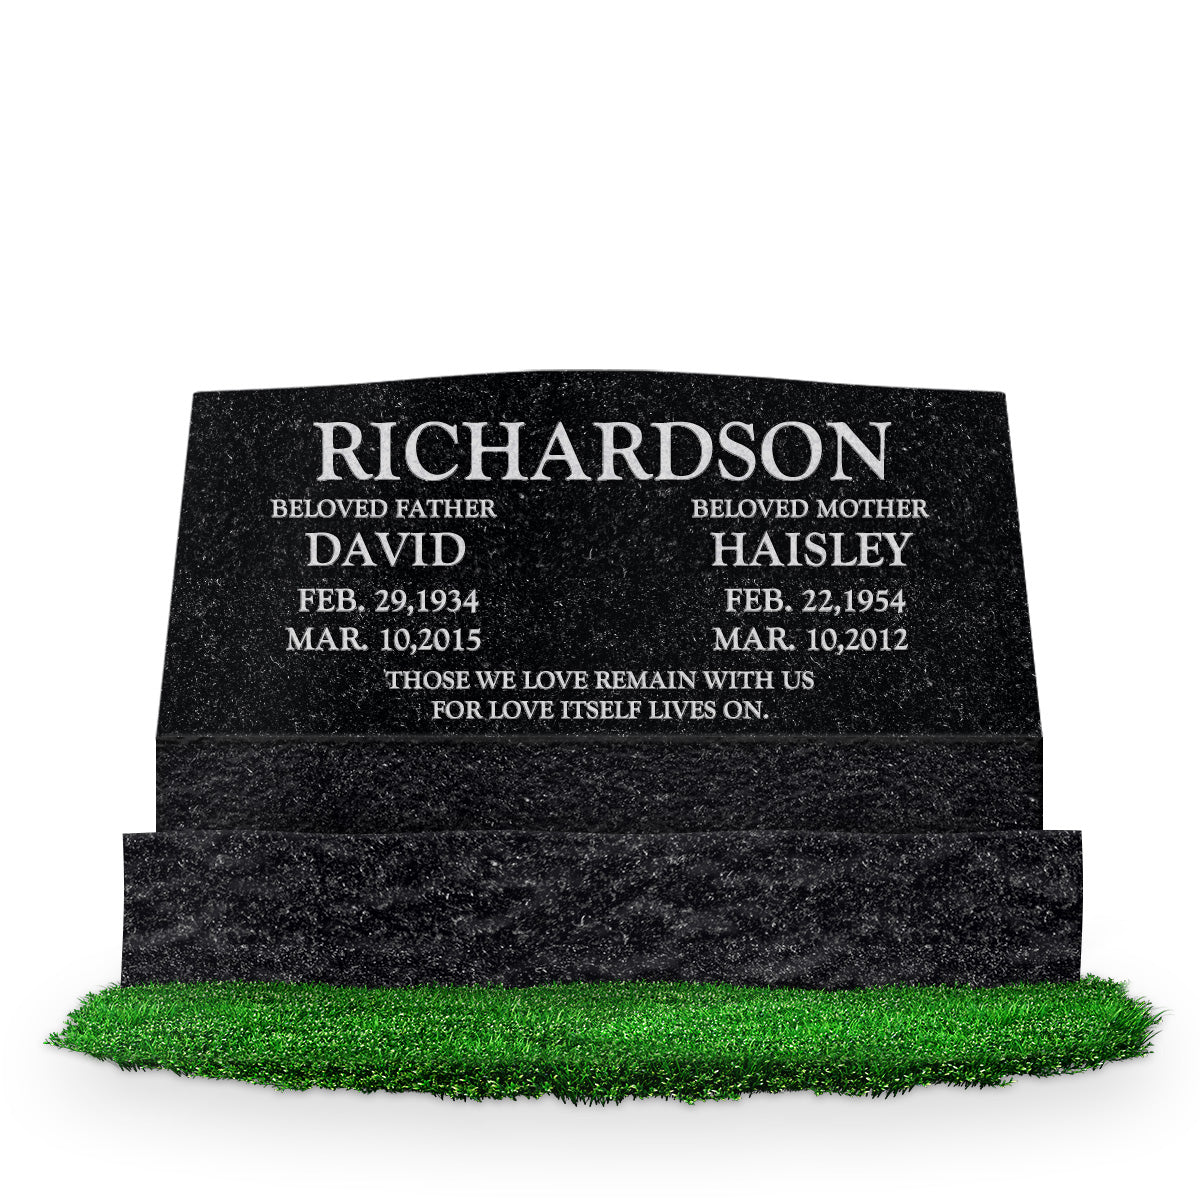 36″ x 10″ x 16″ Serp Top Slant Headstone: polished front and back; 42″ base; Companion/Text